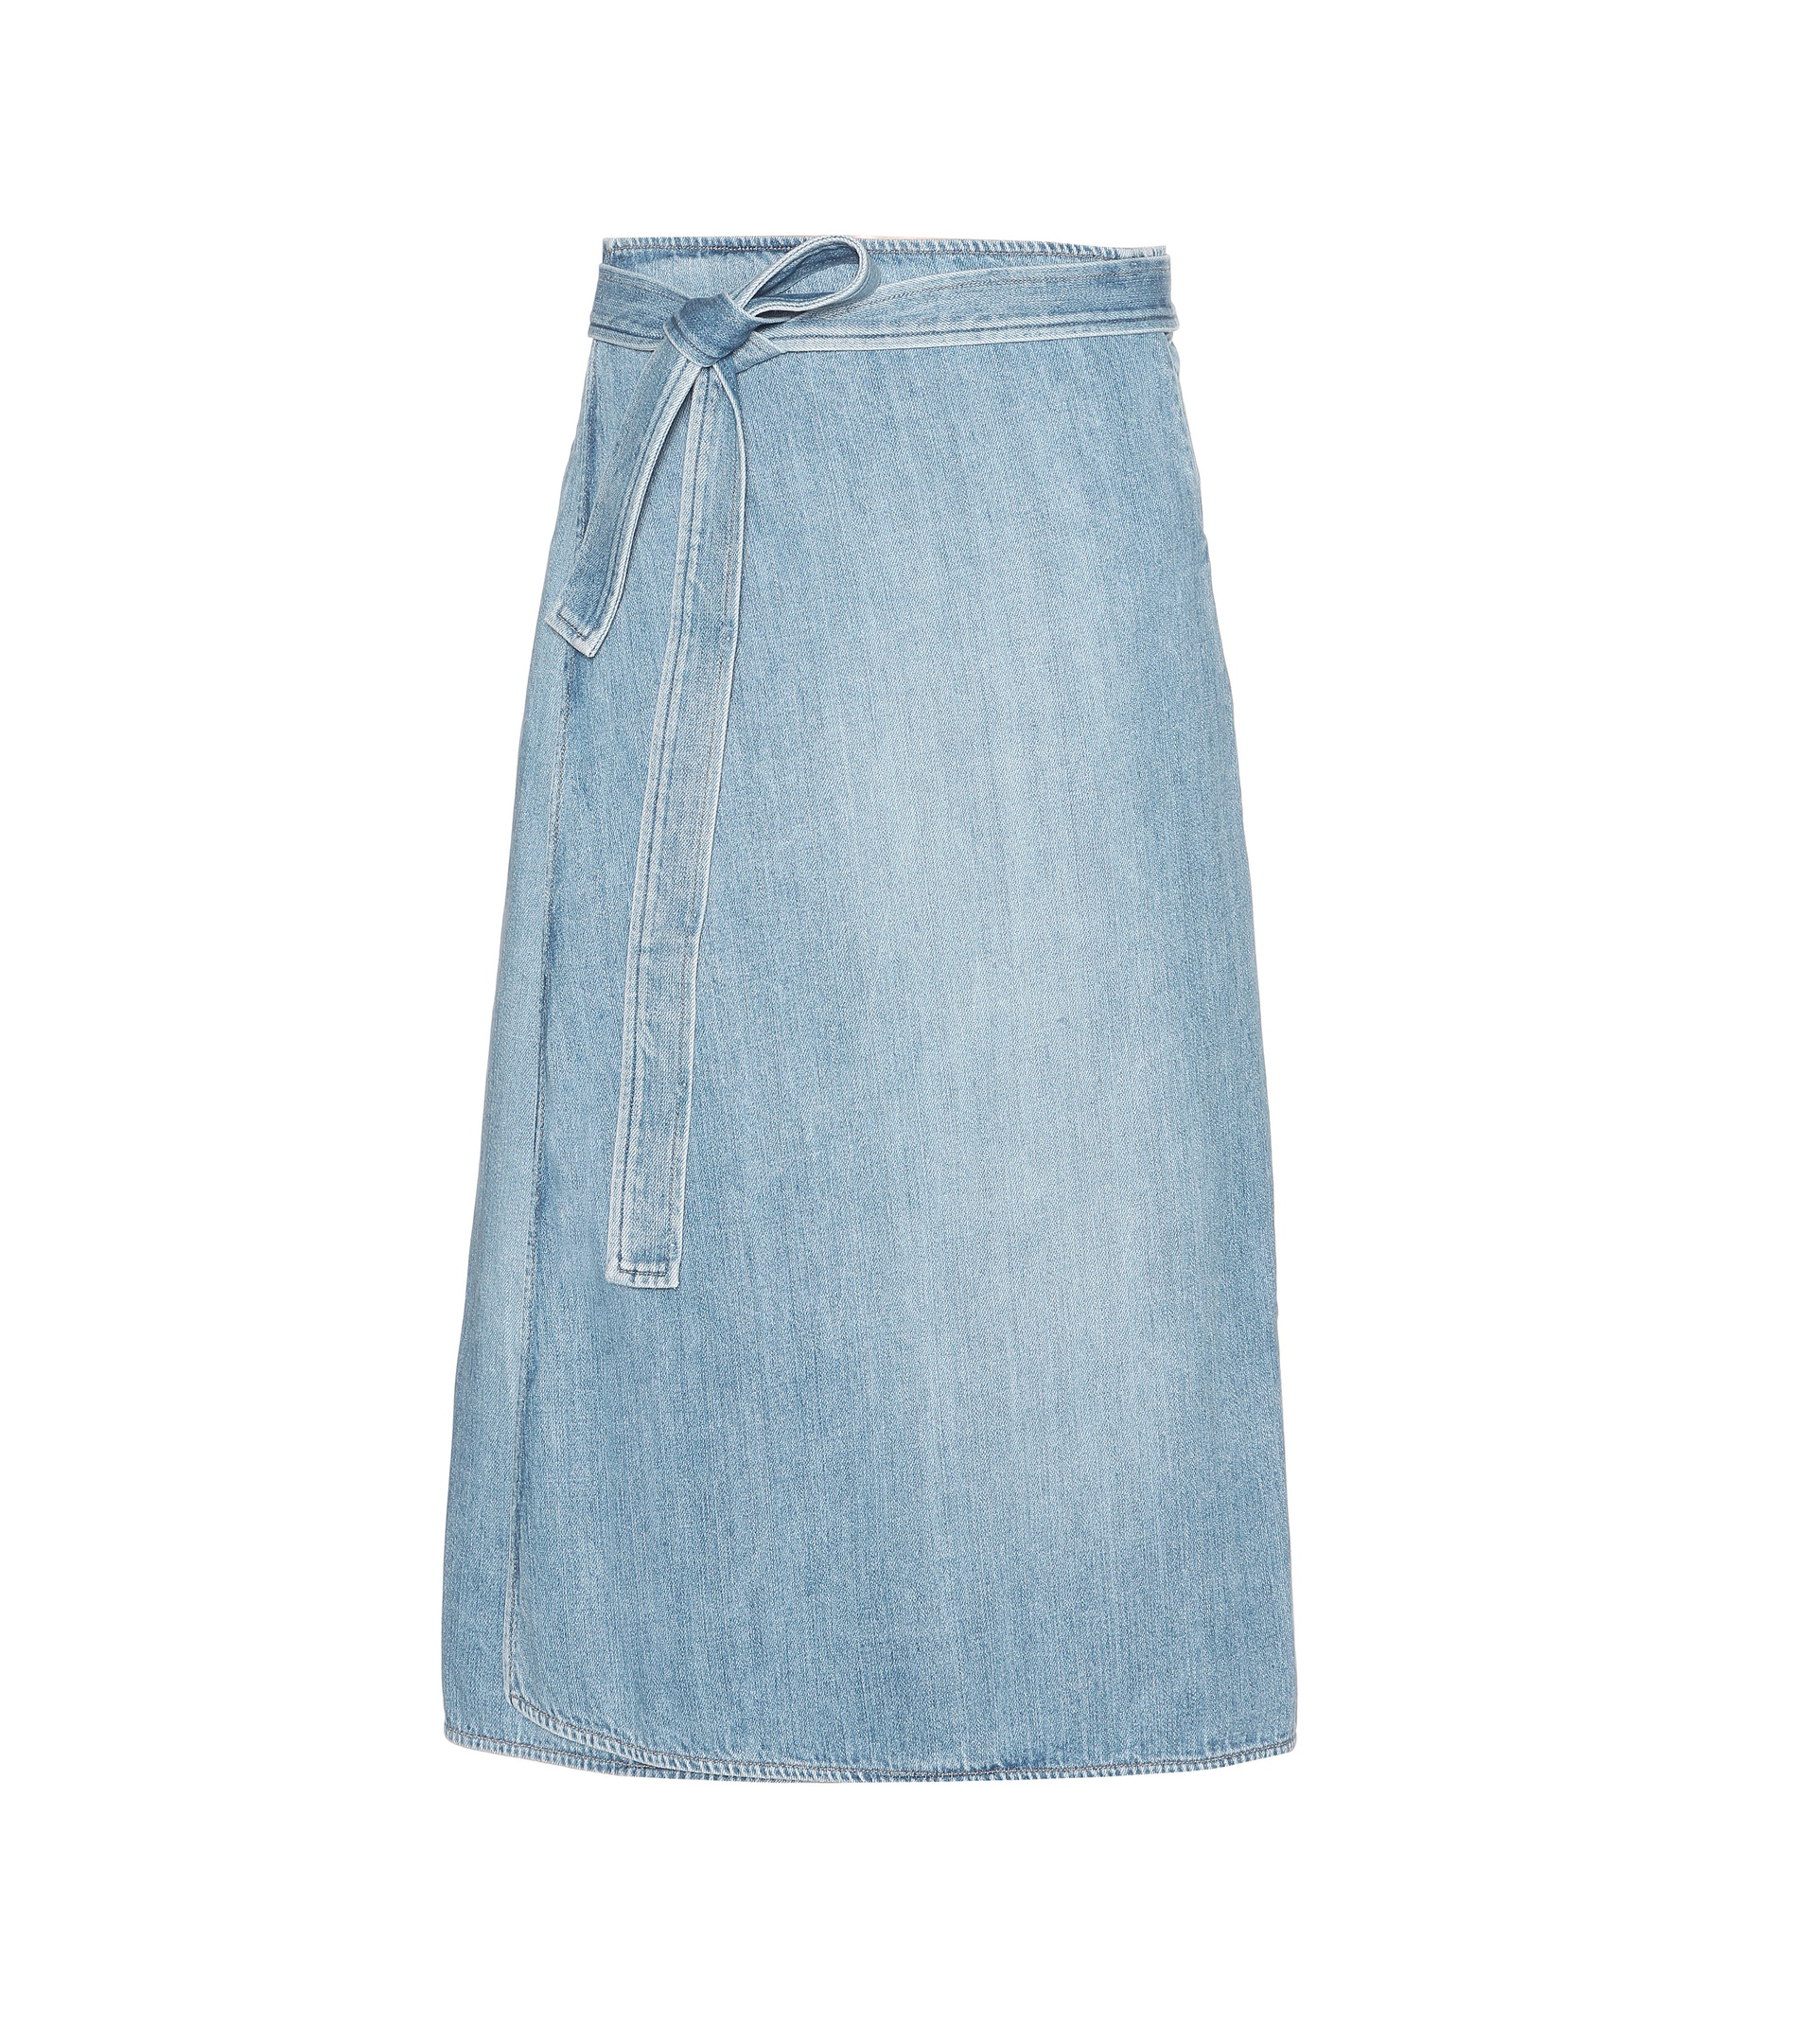 Lyst - Citizens of Humanity Donna Denim Wrap Skirt in Blue